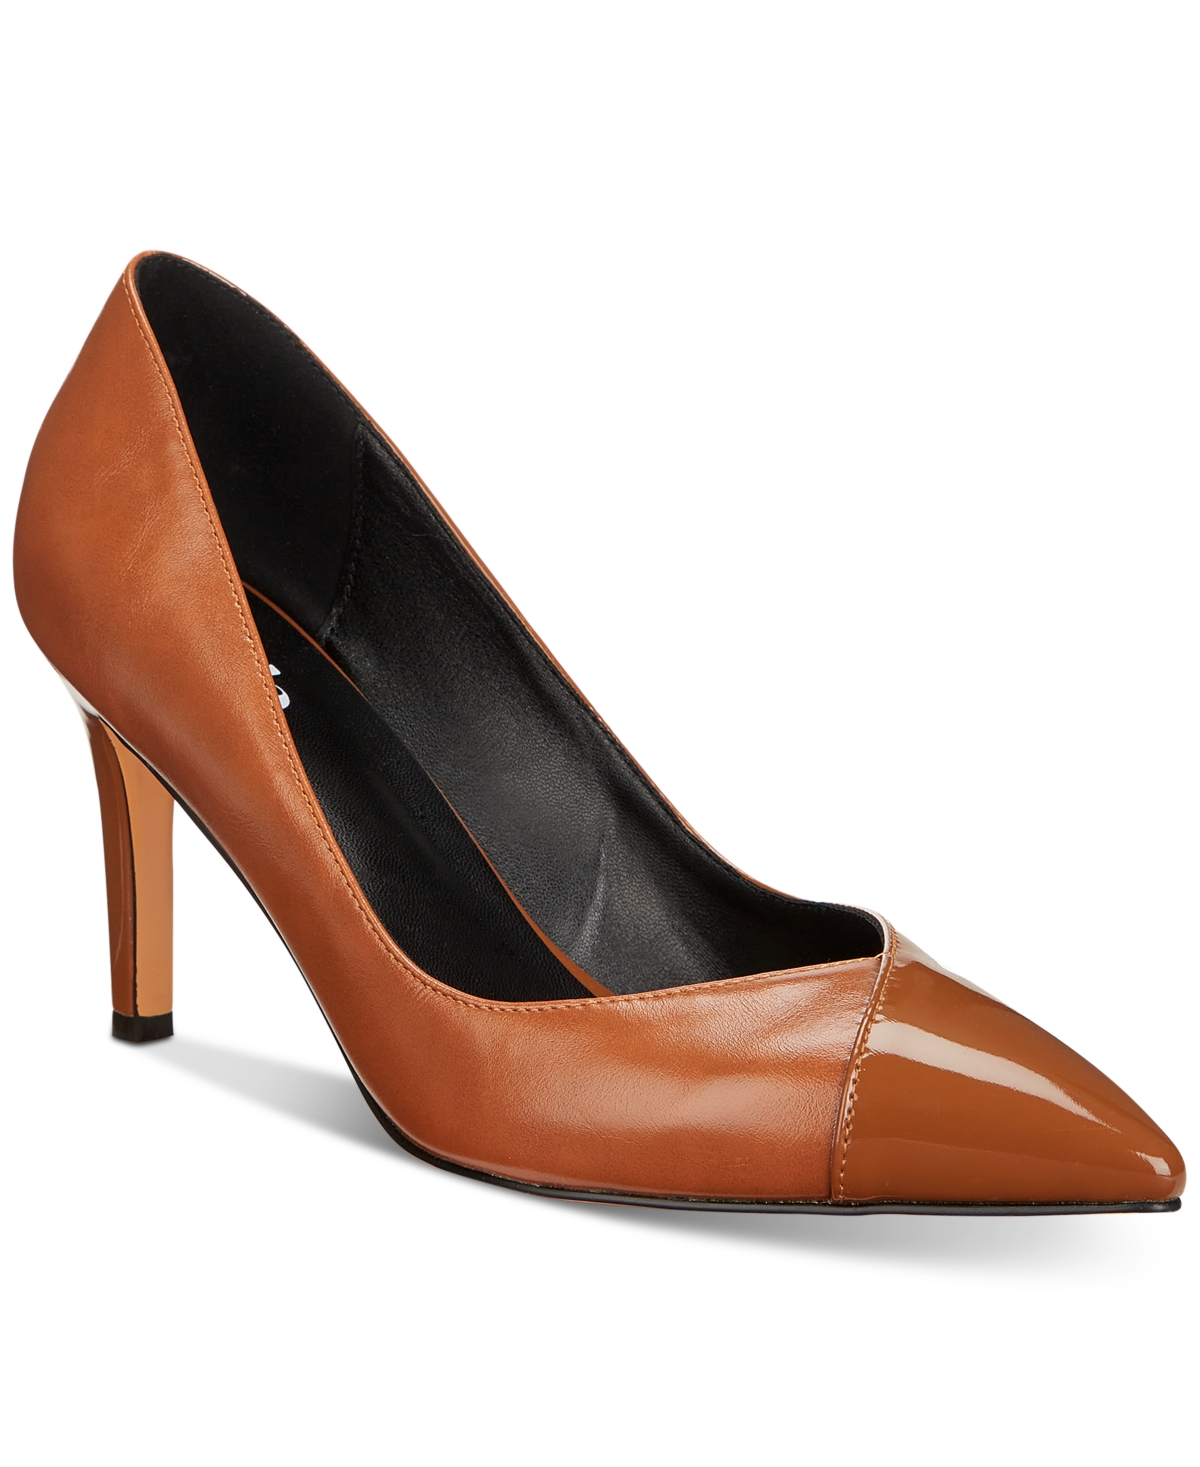 Women's Michelle Slip-On Pointed-Toe Pumps-Extended sizes 9-14 - Coffee